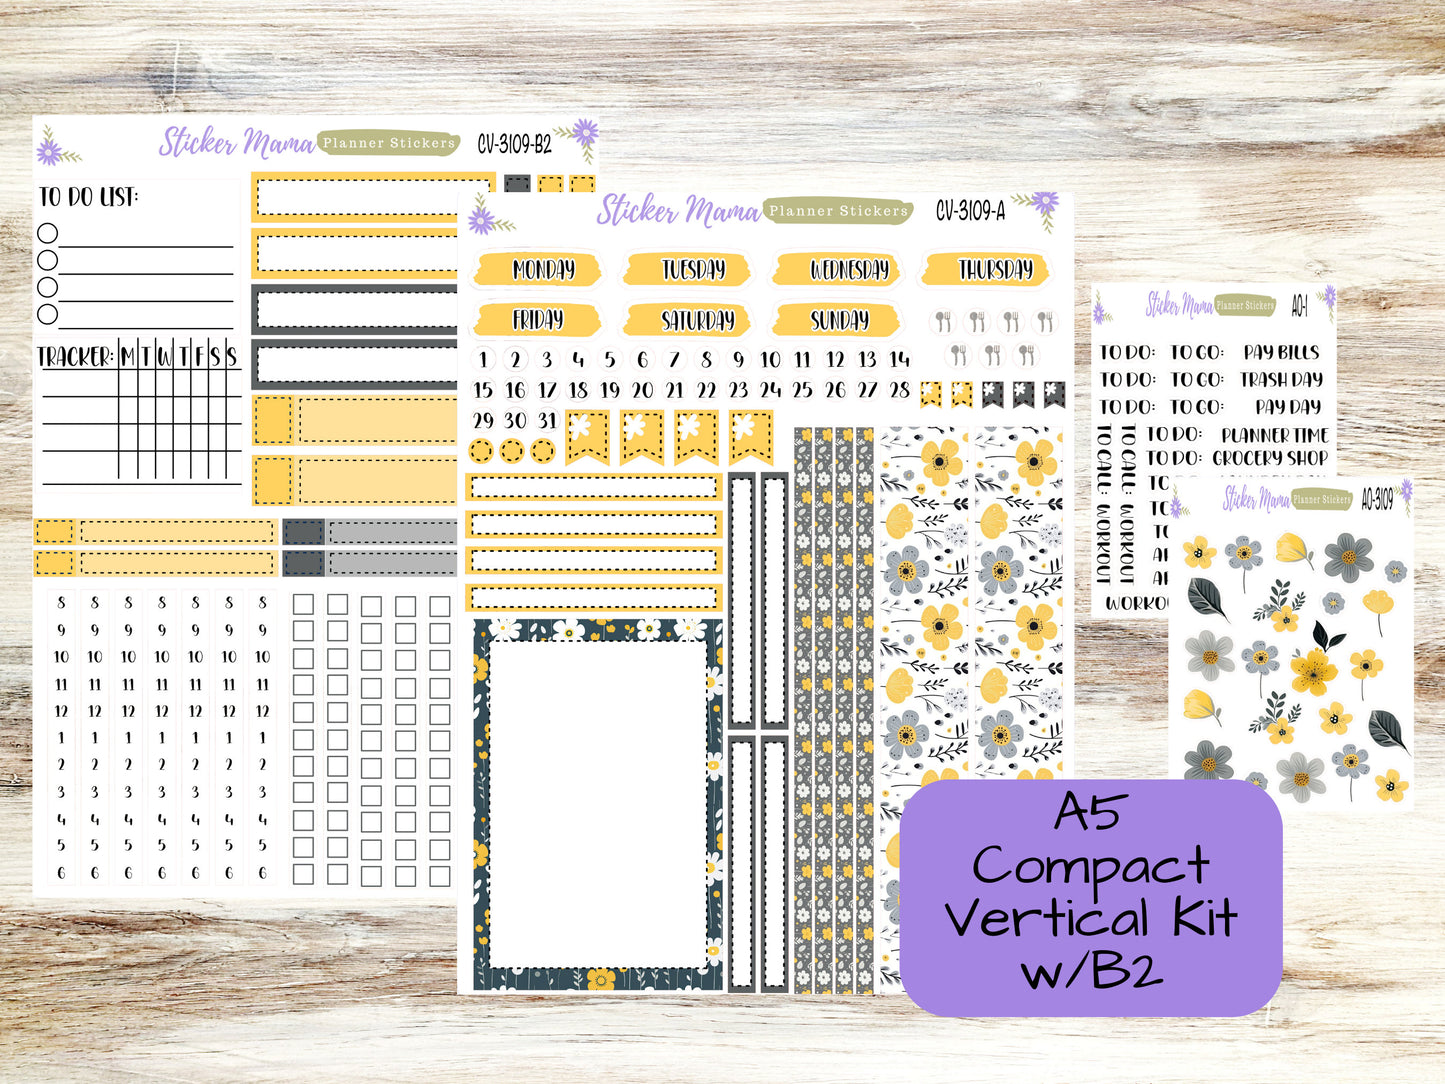 A5 COMPACT VERTICAL-Kit #3109 || Grey and Yellow Floral  - Compact Vertical - Planner Stickers - Erin Condren Compact Vertical Weekly Kit